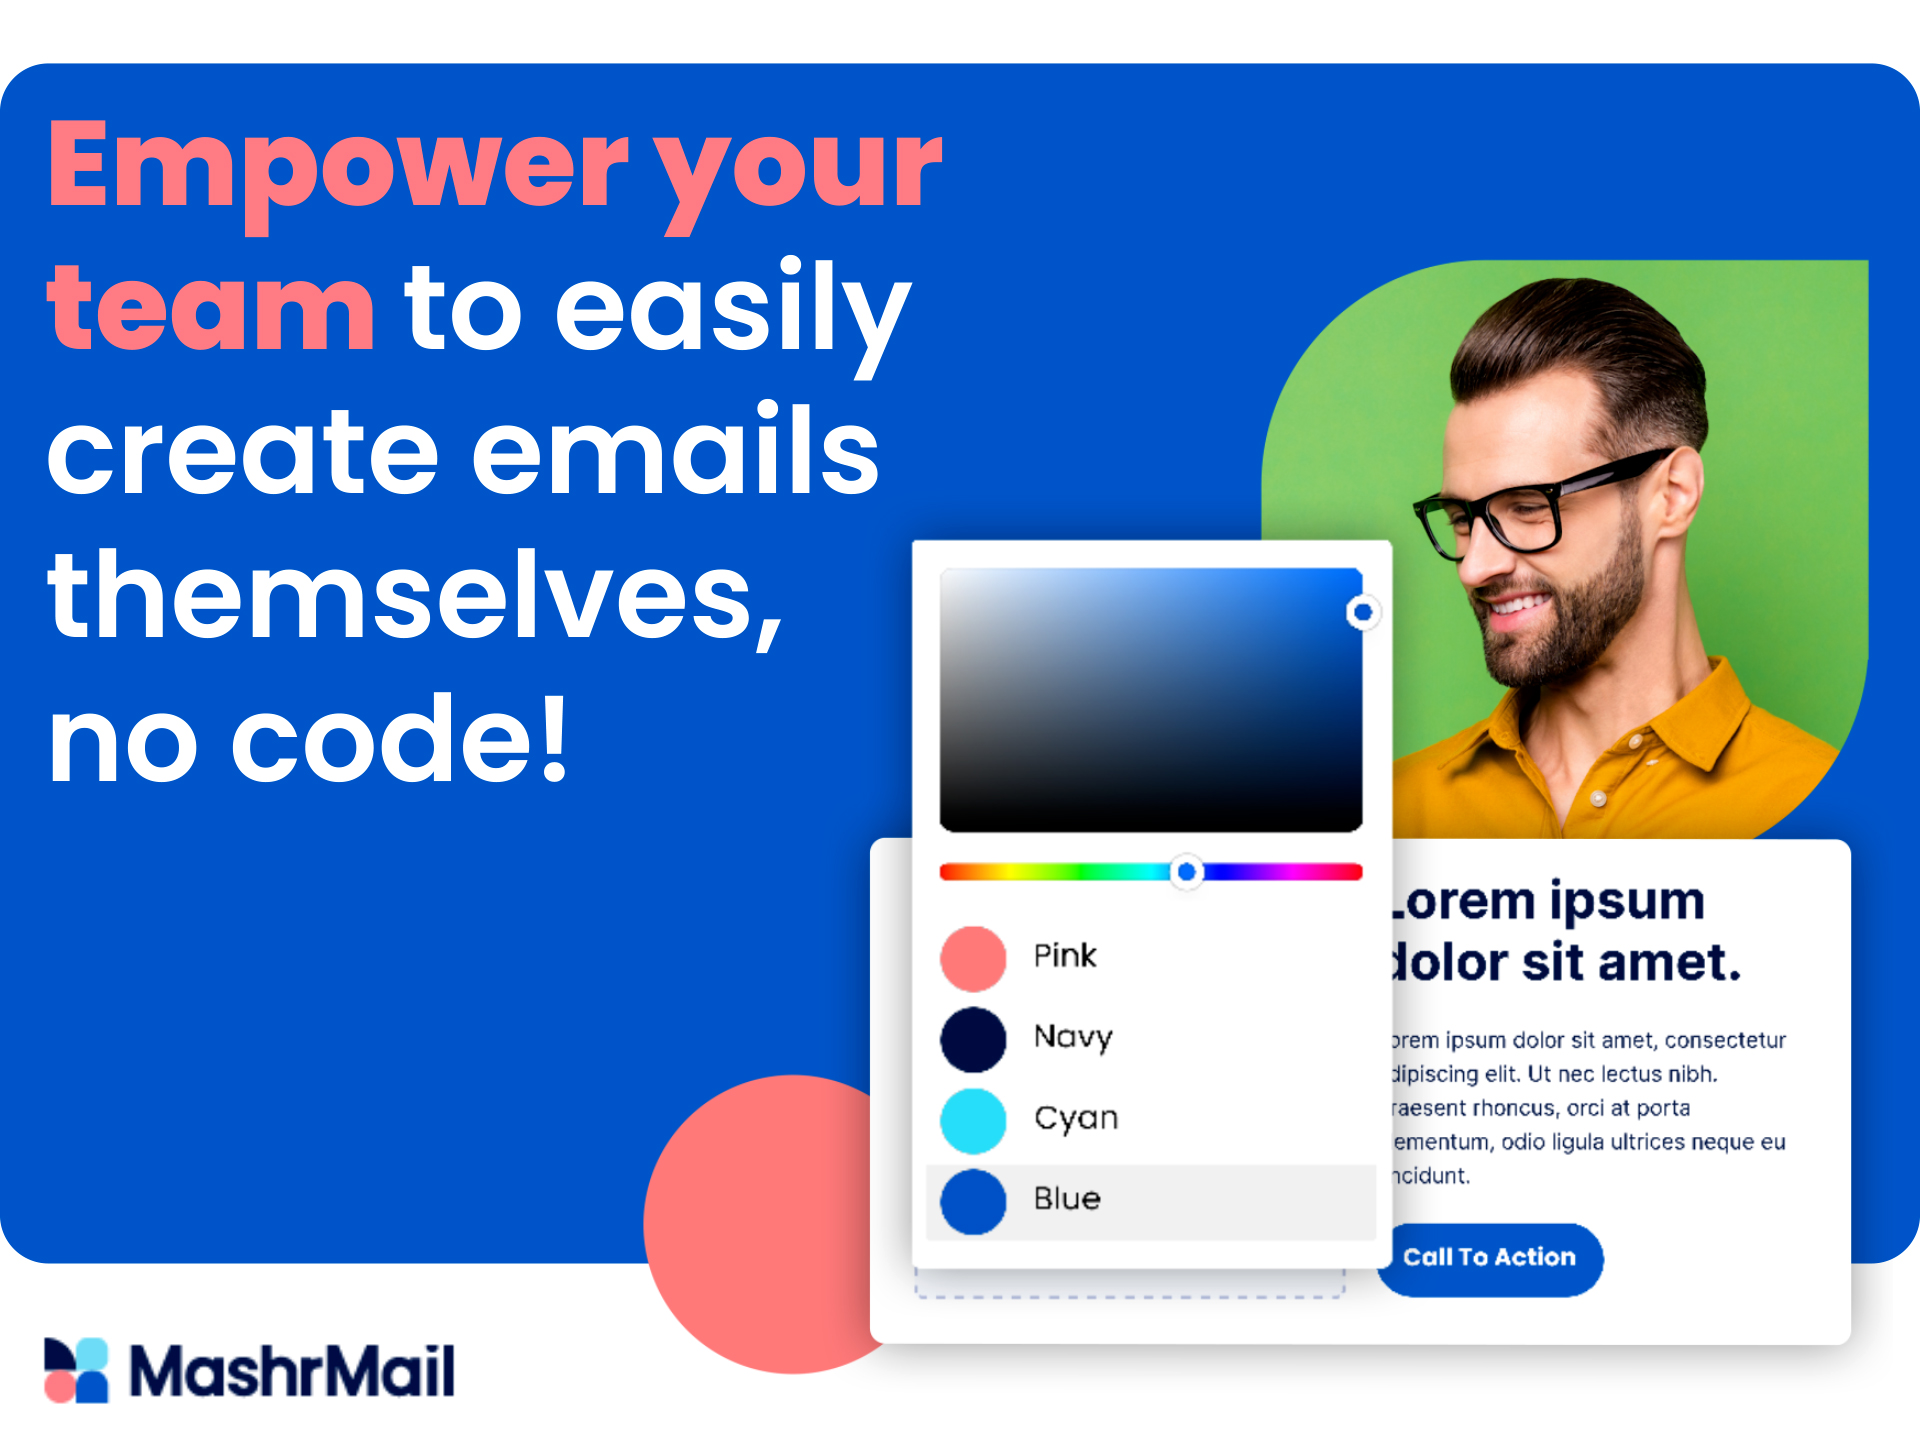 Empower your team to easily create emails themselves, no code!